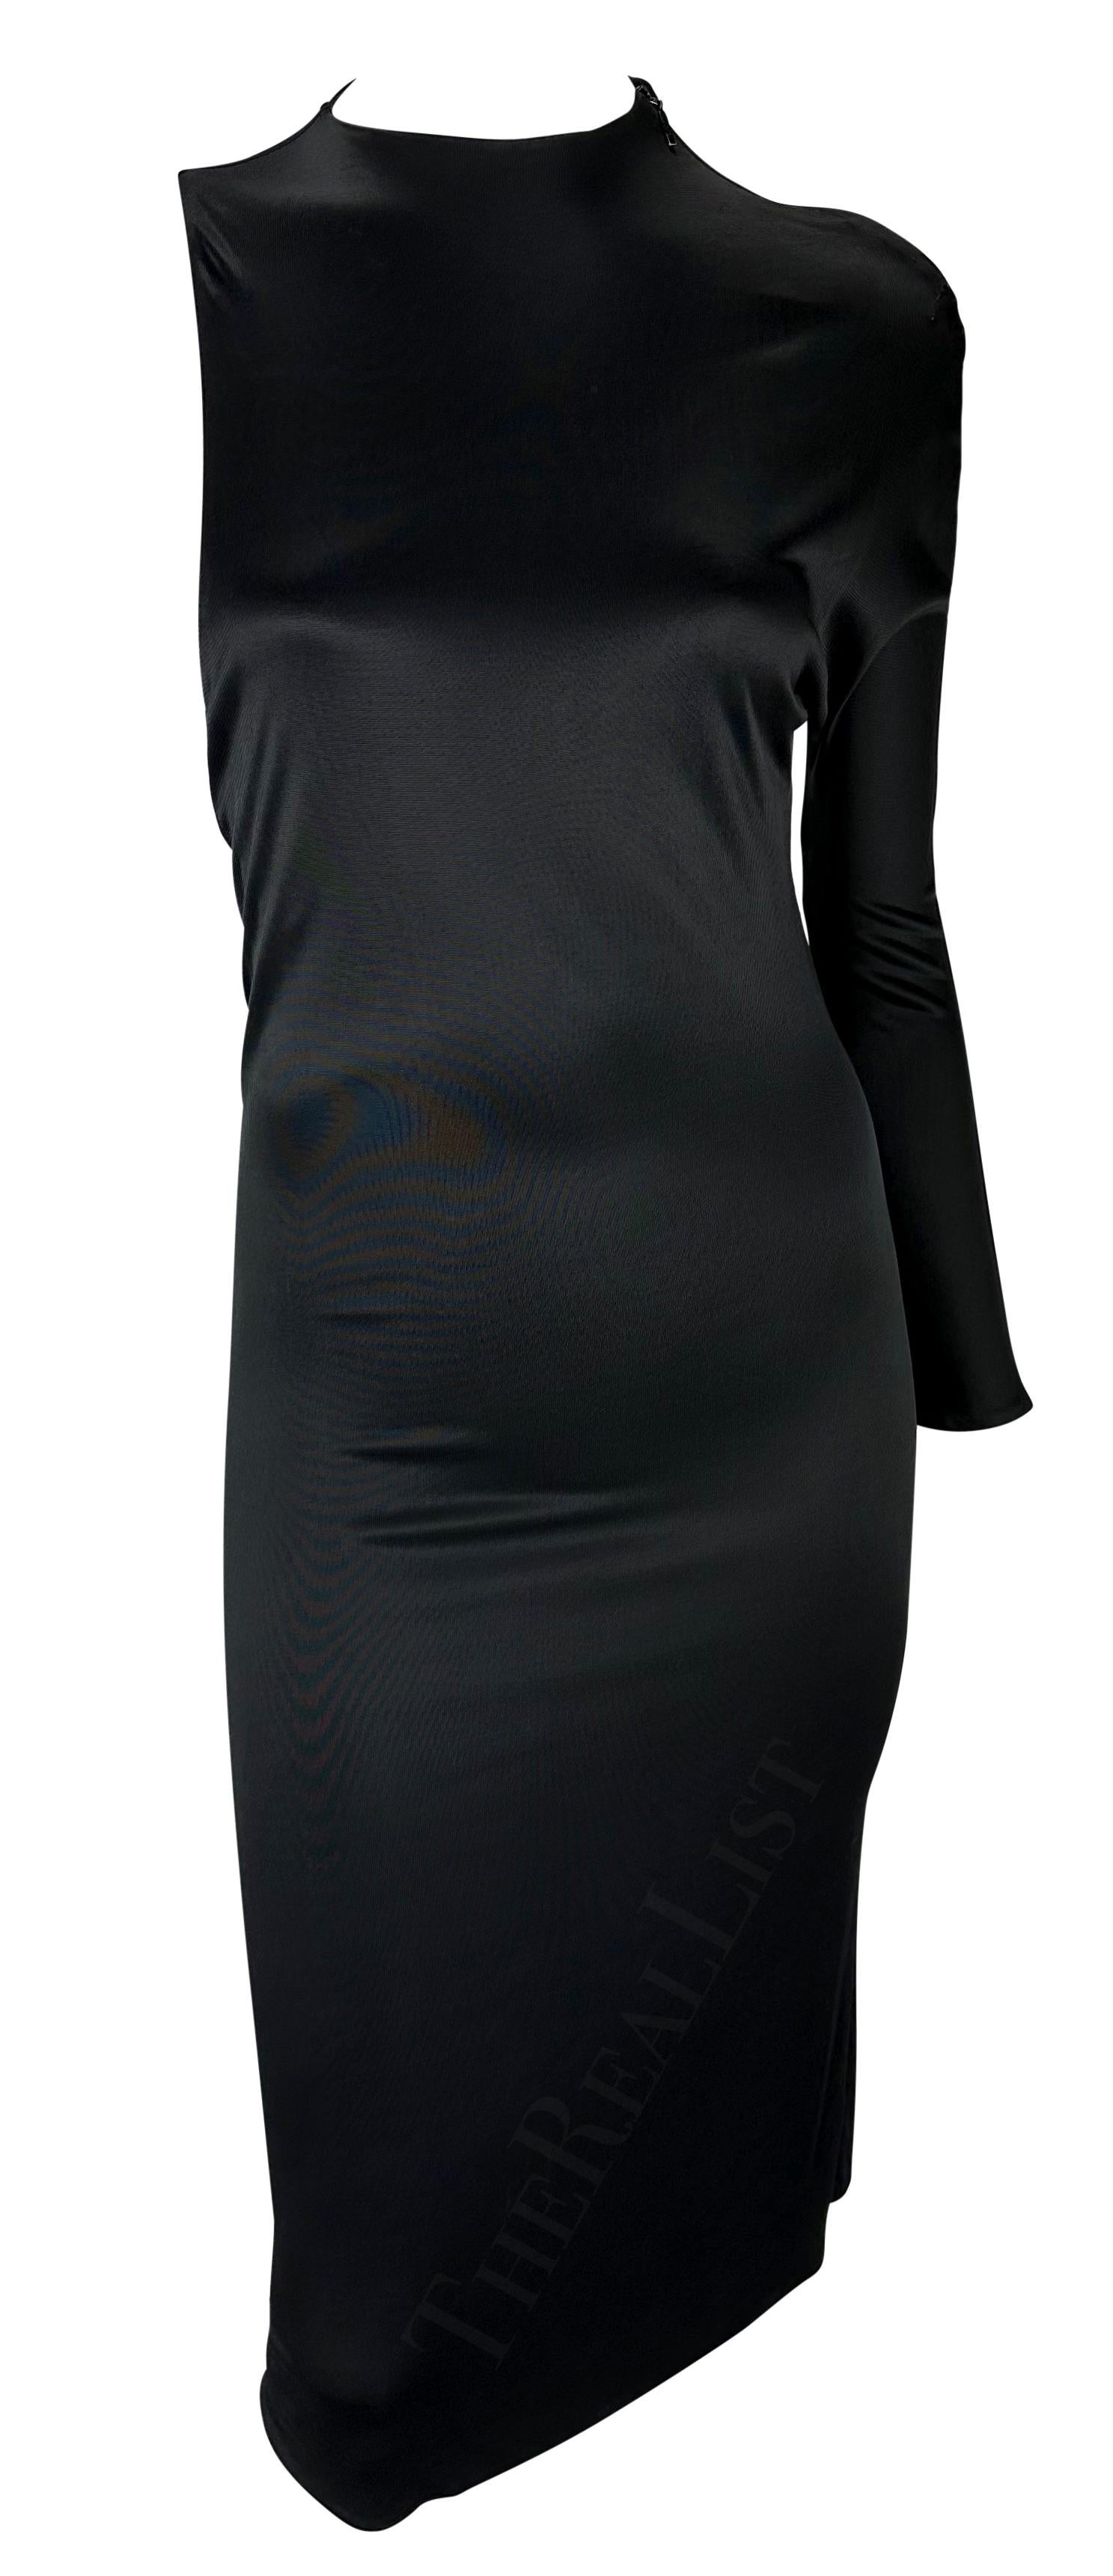 Women's S/S 2000 Gucci by Tom Ford Cutout One-Sleeve Black Bodycon Stretch Dress For Sale